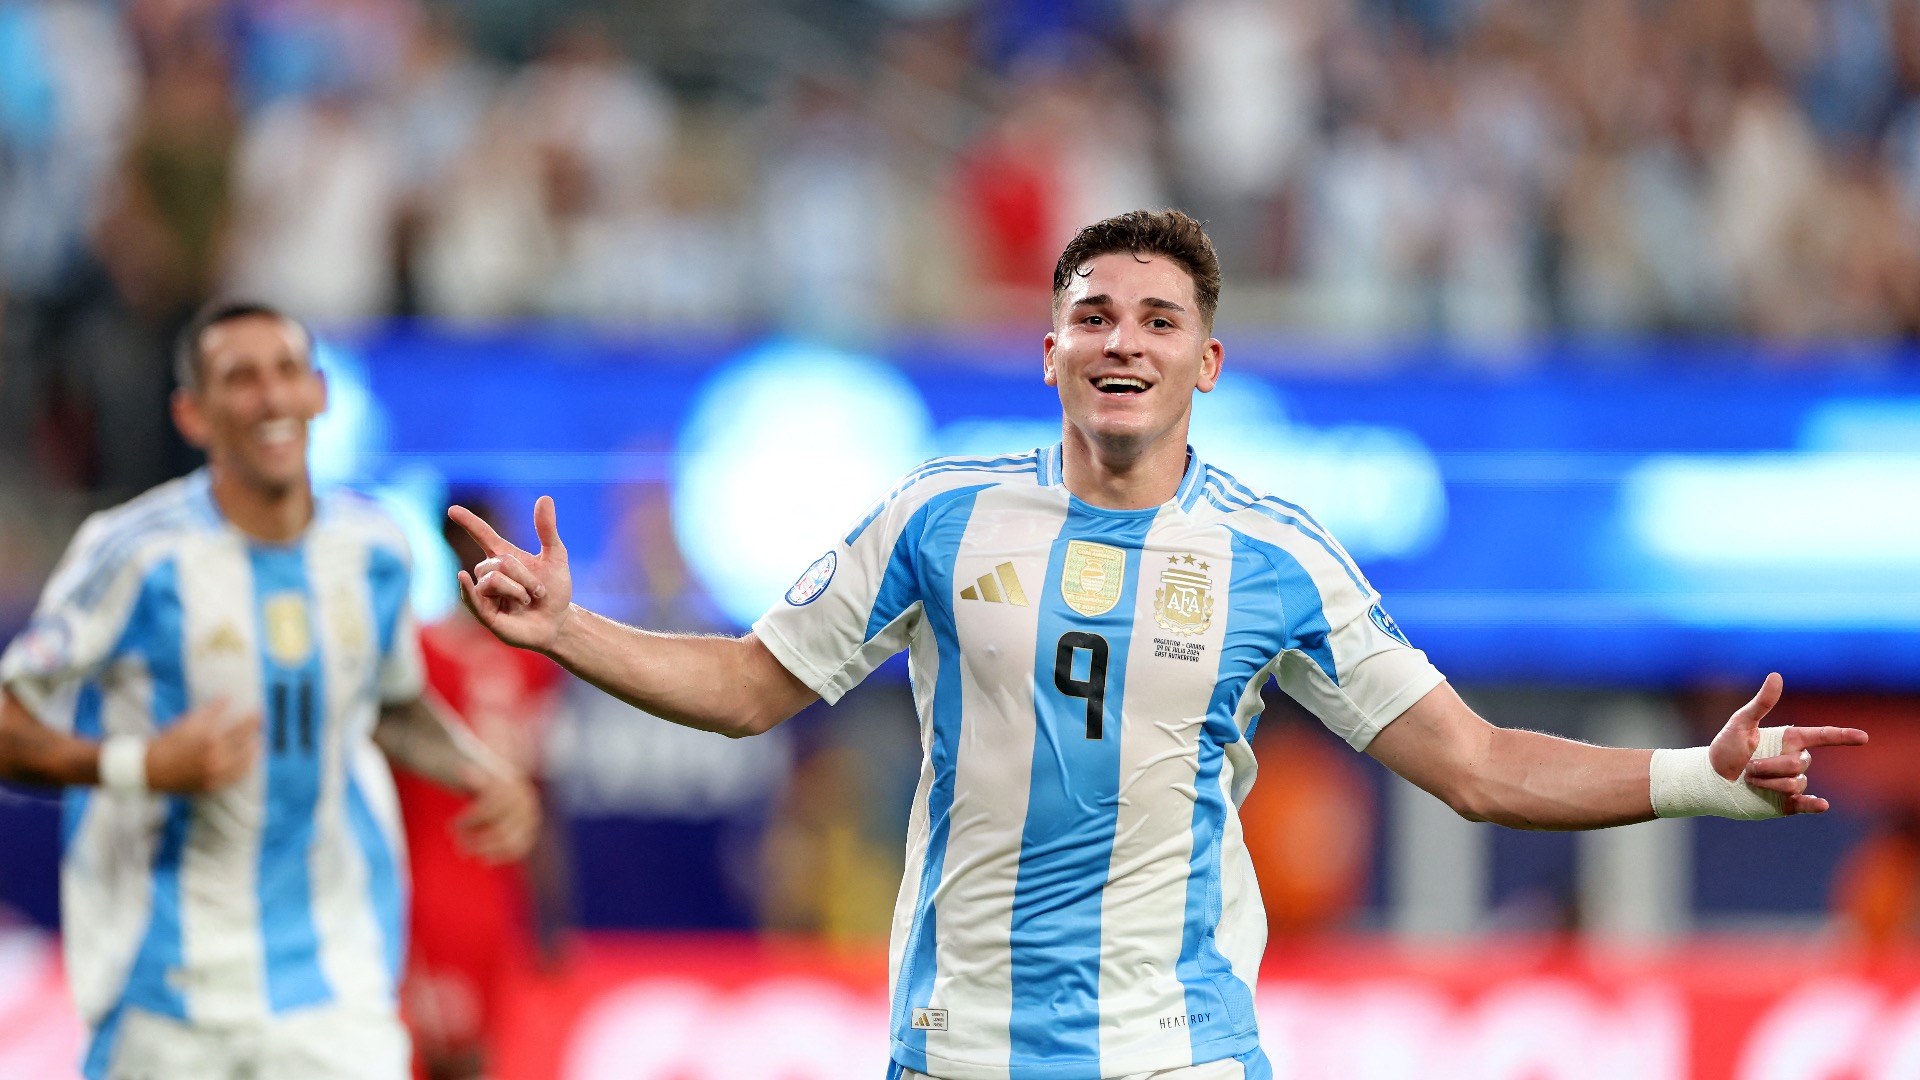 Video: Man City star catches Canada napping to score Argentina’s opening goal